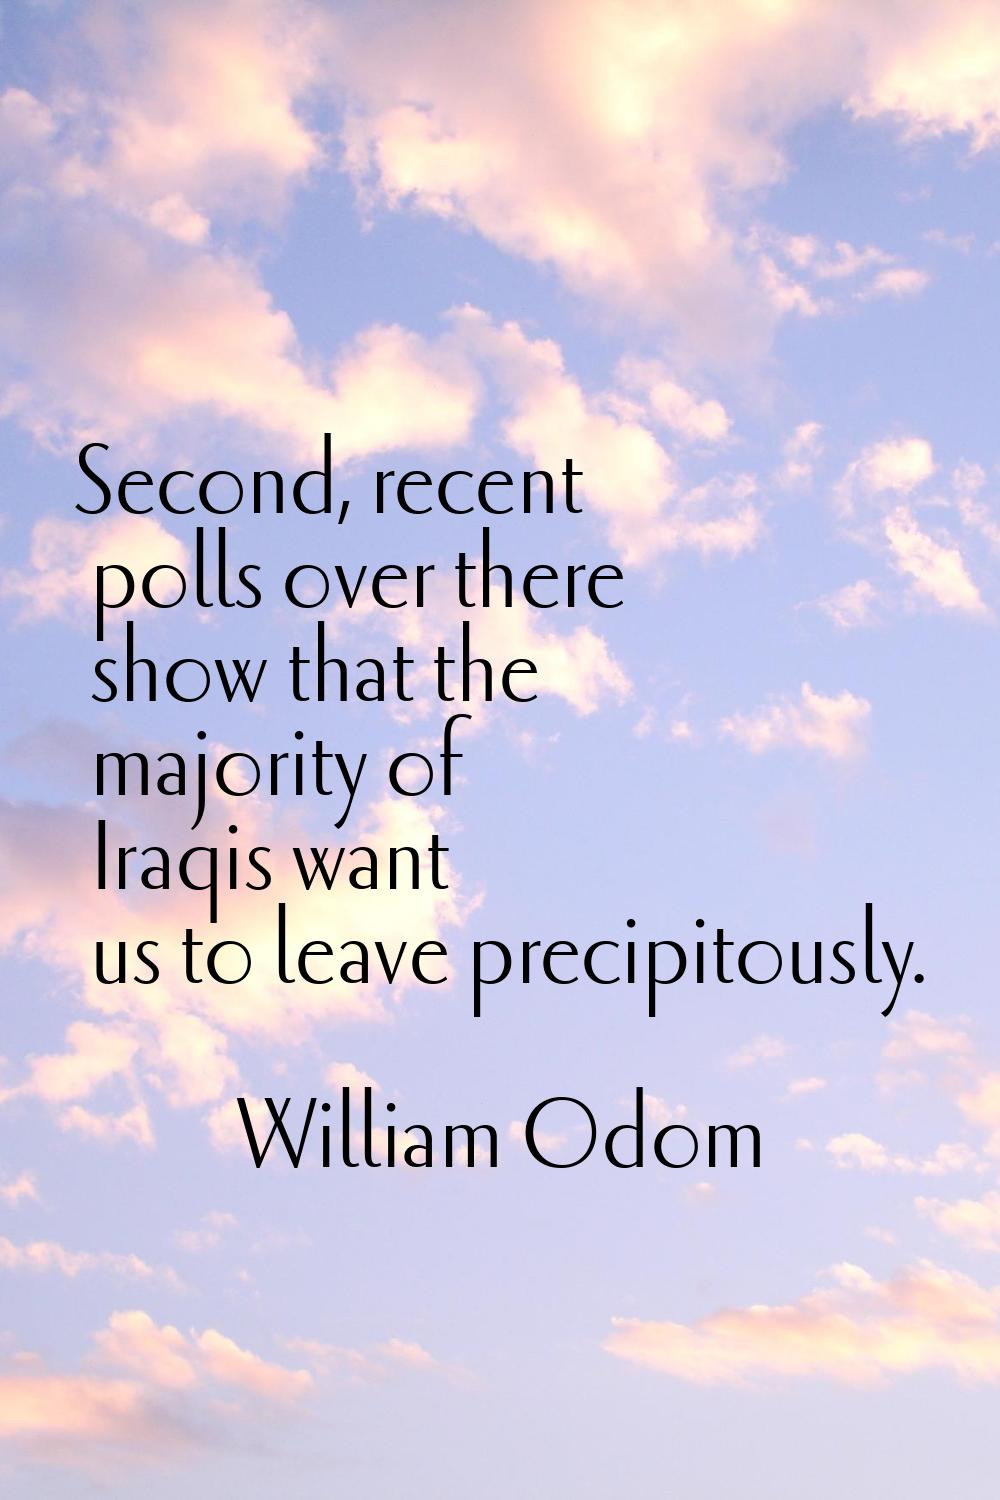 Second, recent polls over there show that the majority of Iraqis want us to leave precipitously.